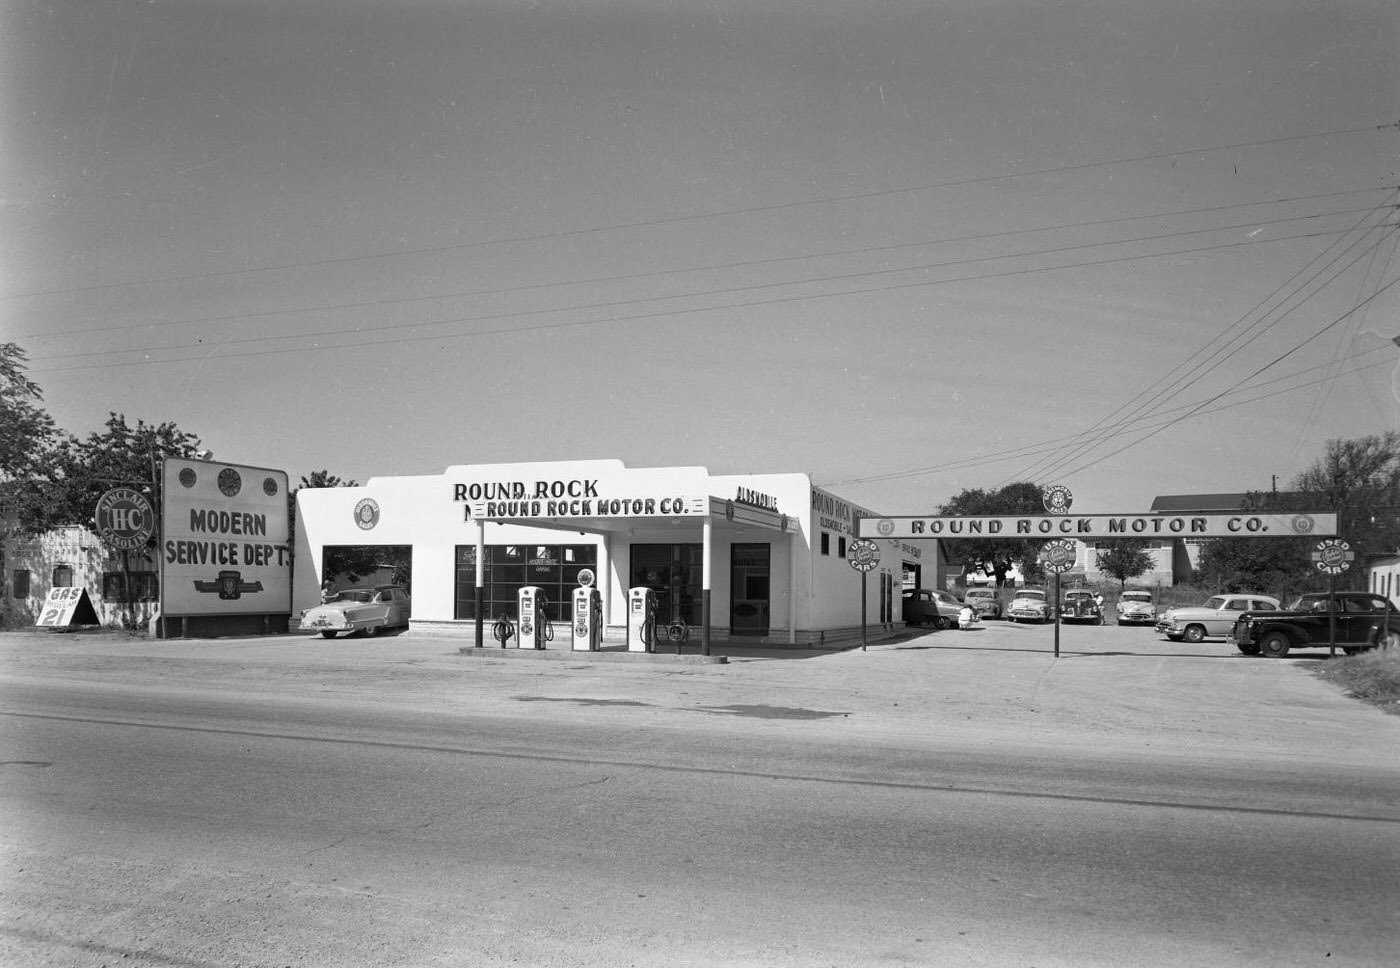 Round Rock Motor Company, Exterior With Cars and Sinclair Gasoline Sign, 1952.